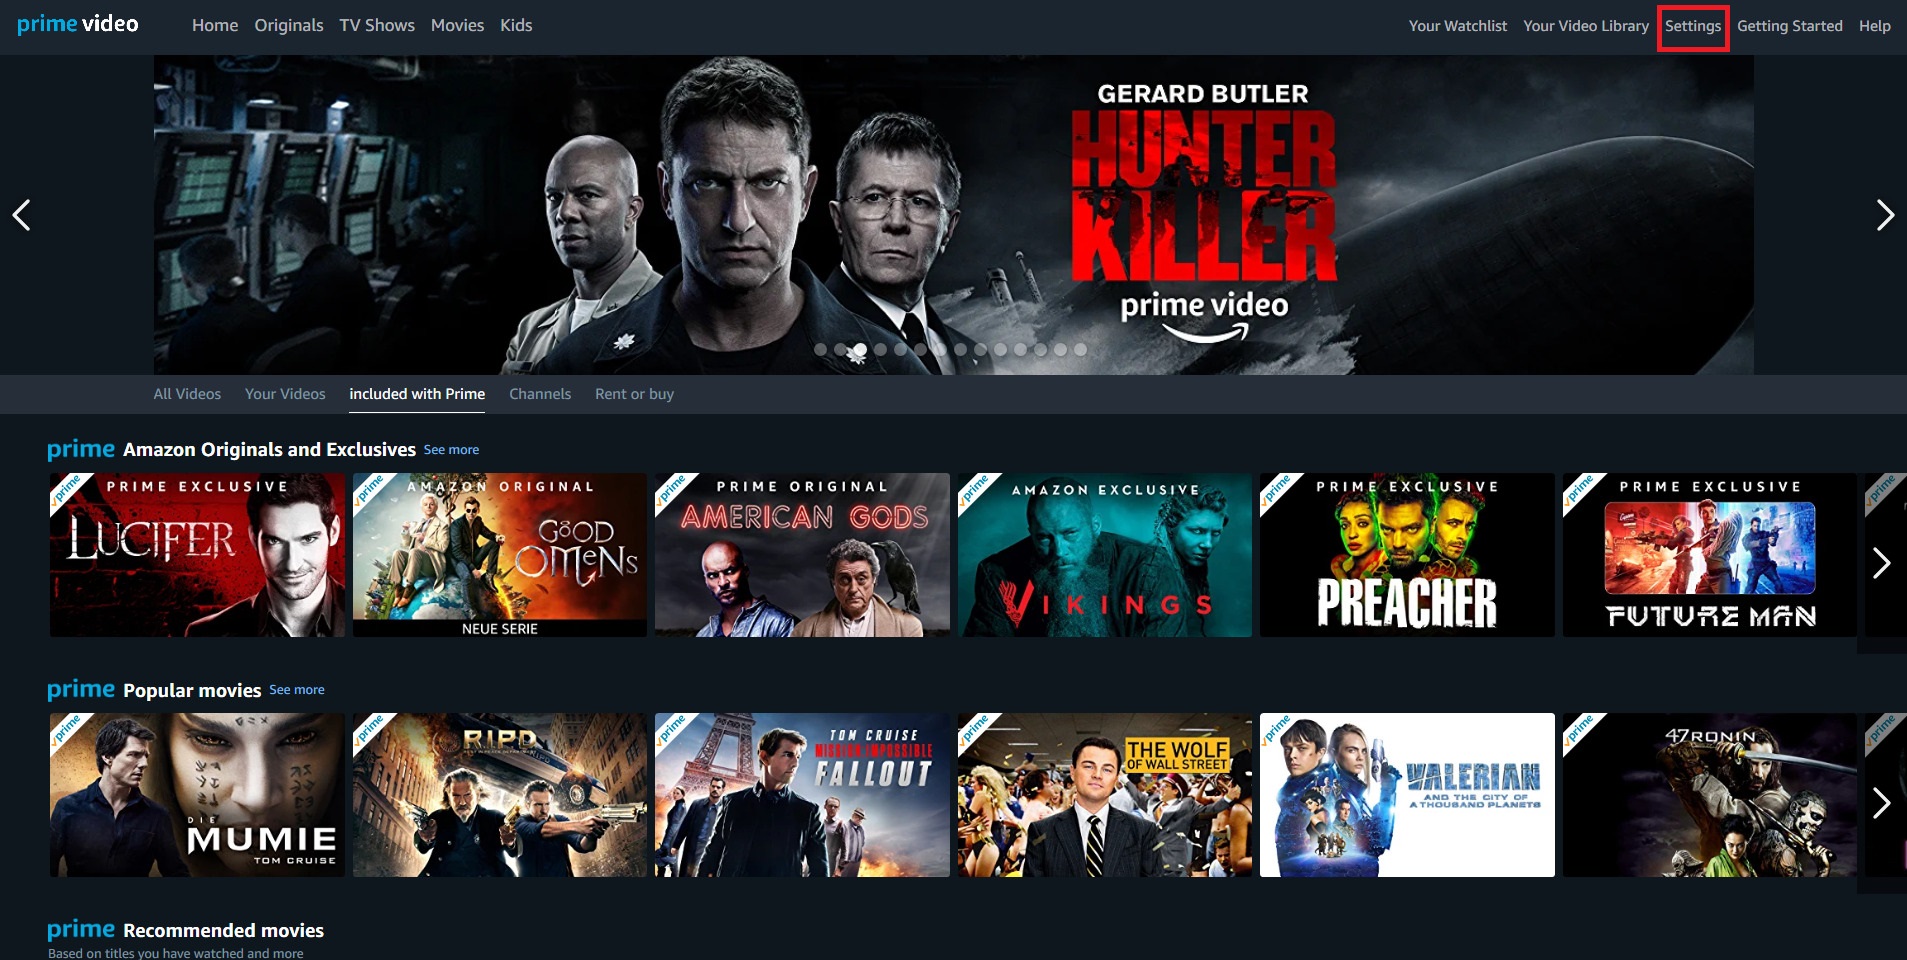 What is Amazon Prime Video and How much does it cost?